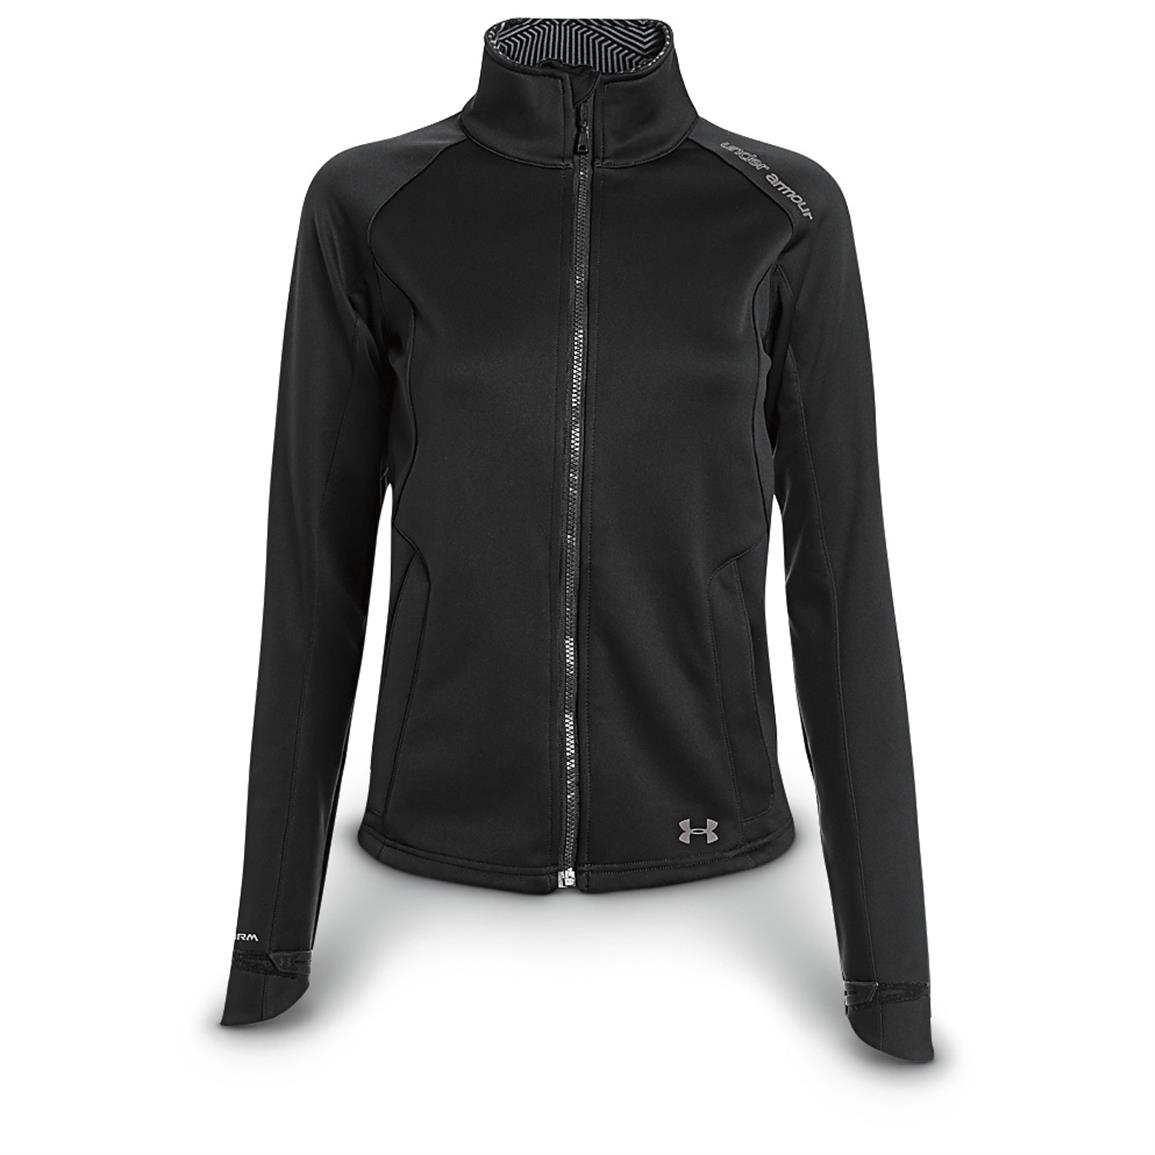 women's under armour soft shell jacket